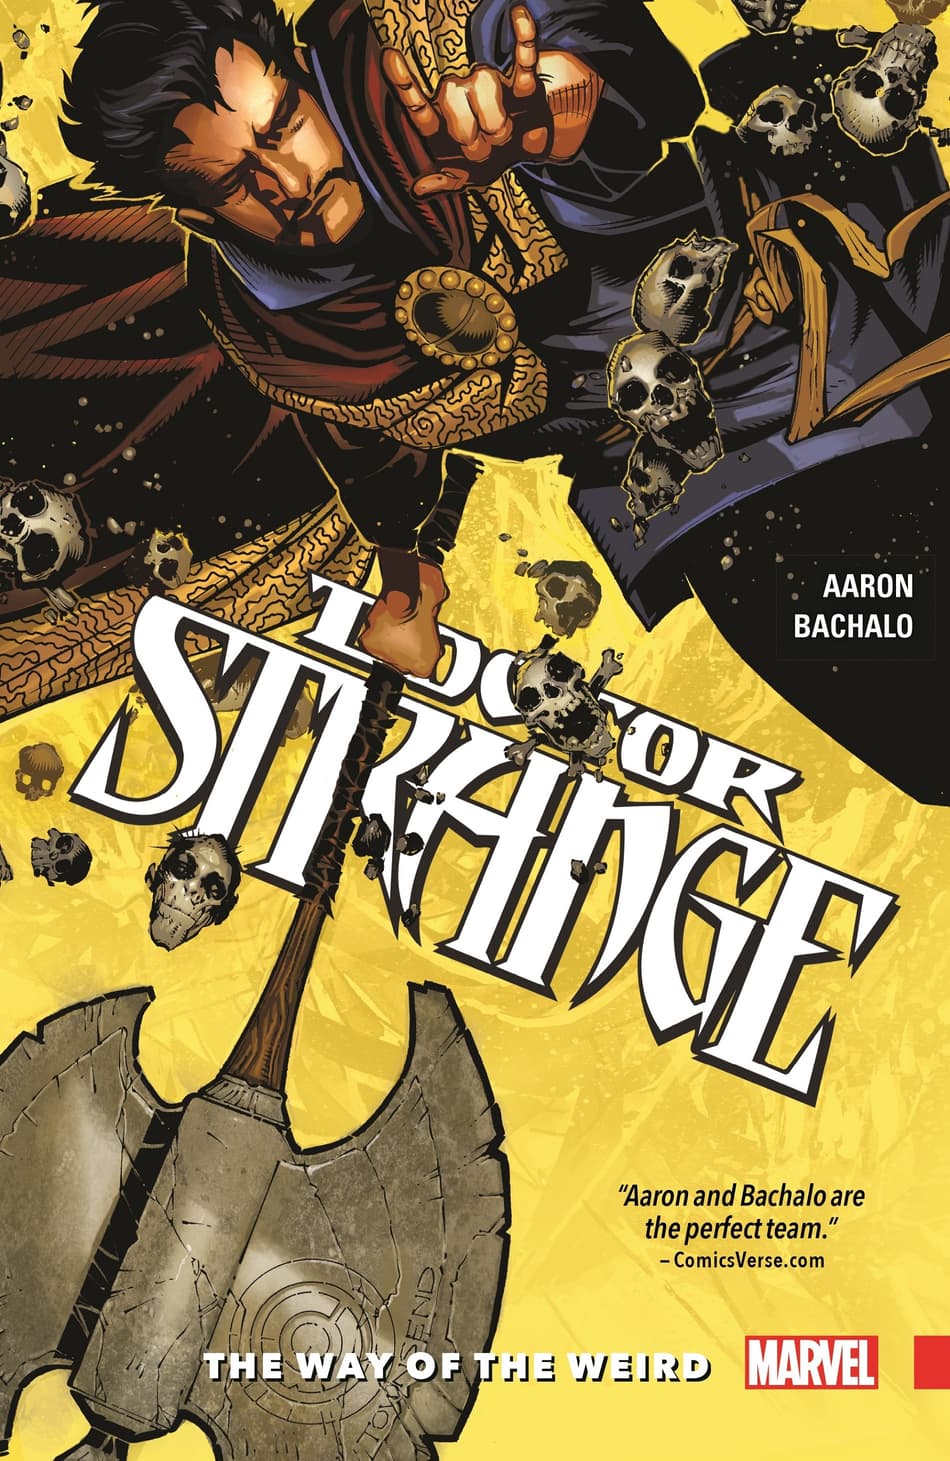 Cover to DOCTOR STRANGE VOL. 1: THE WAY OF THE WEIRD.